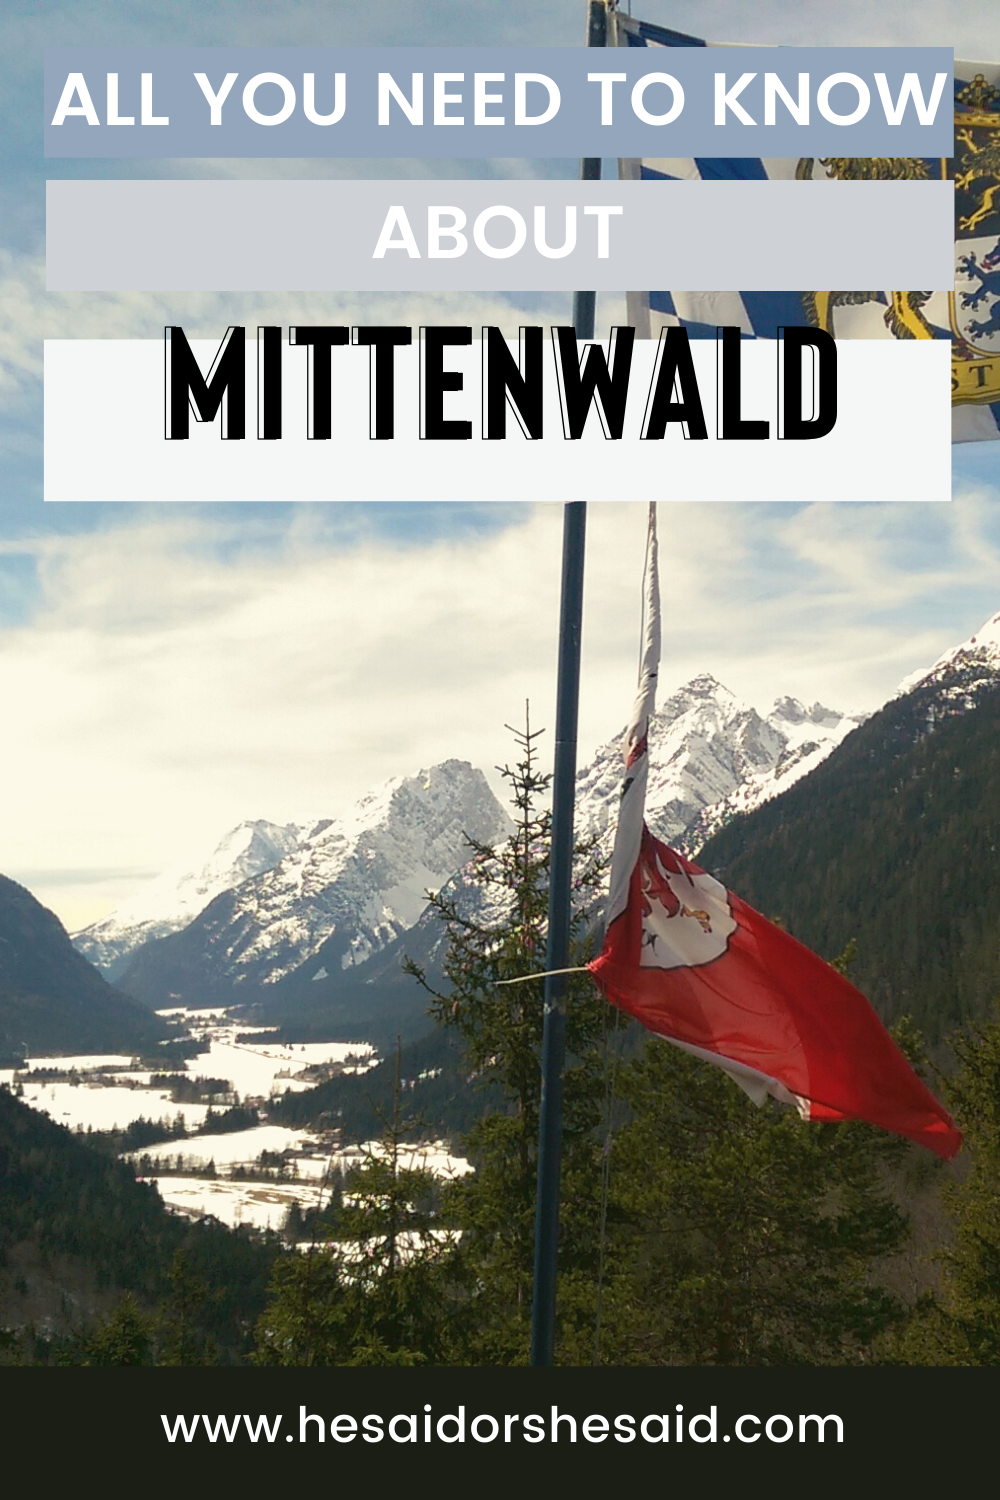 All you need to know about Mittenwald by hesaidorshesaid